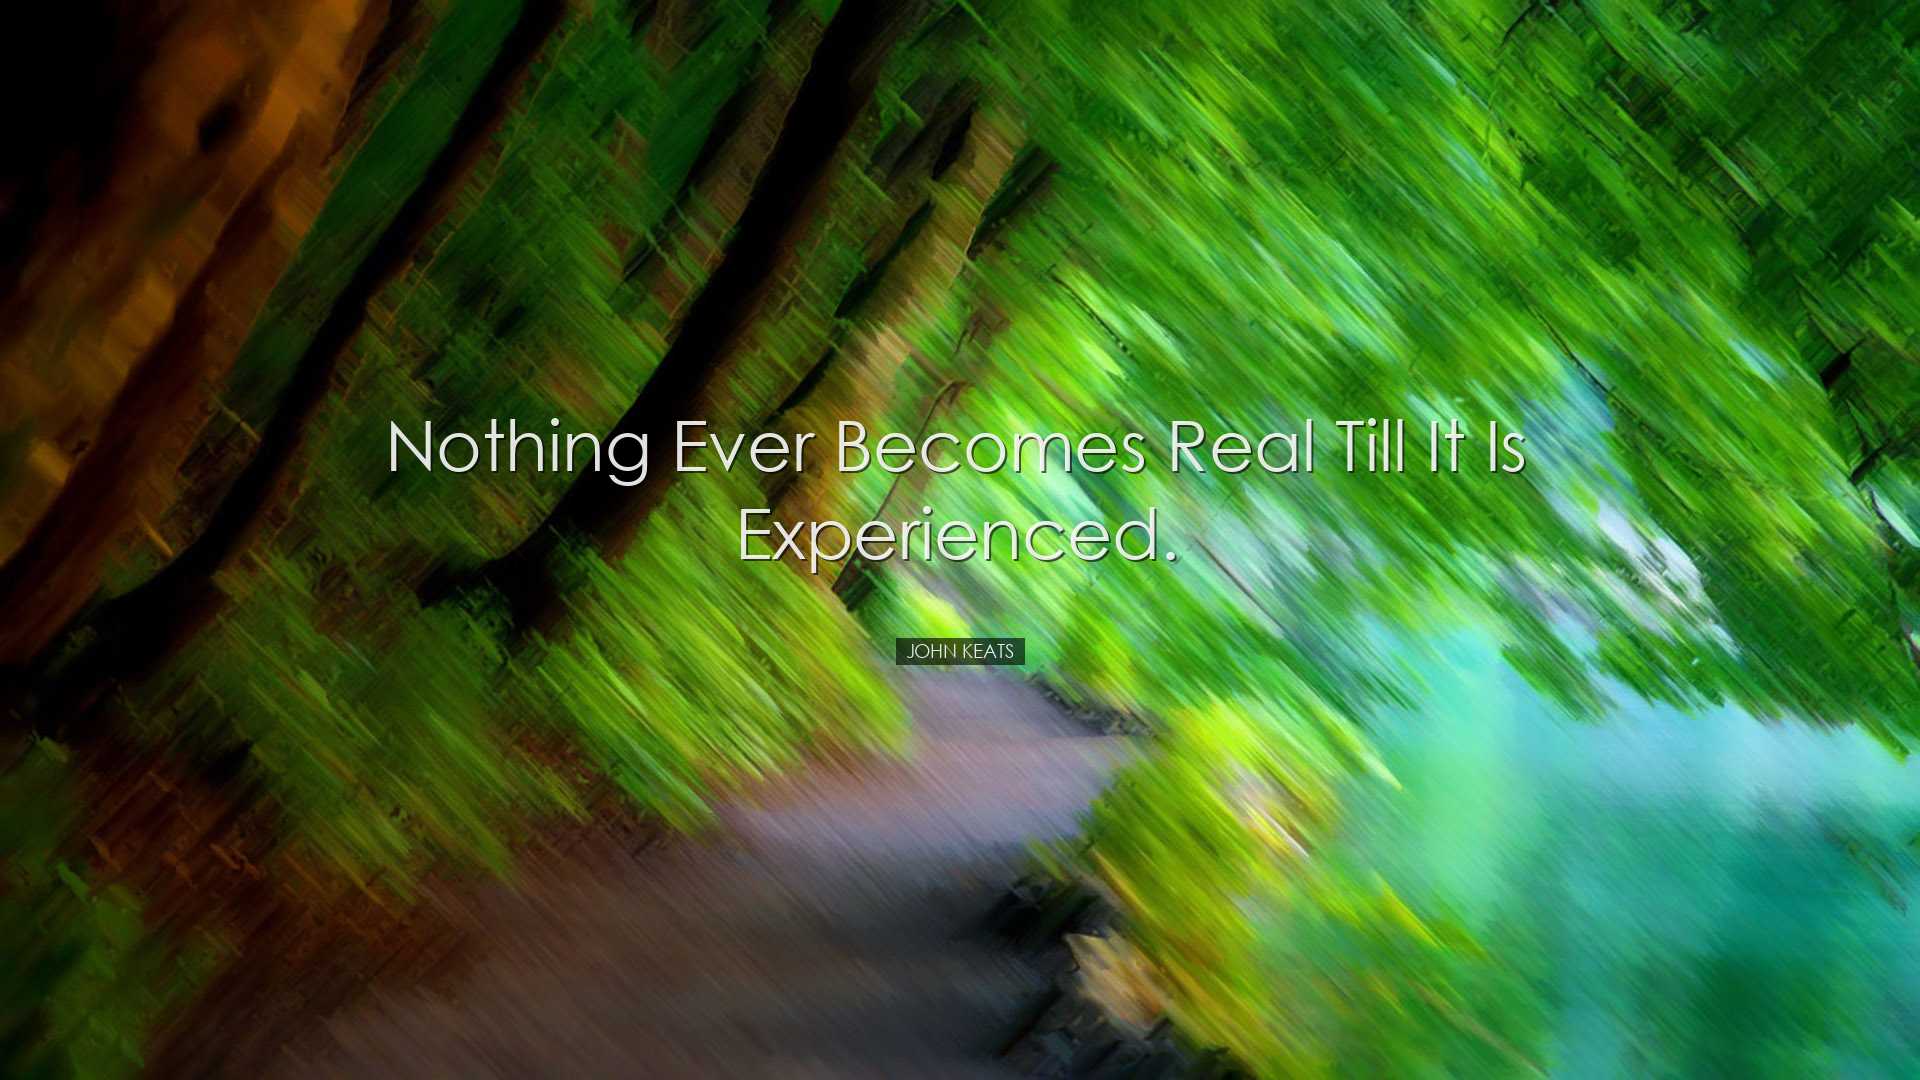 Nothing ever becomes real till it is experienced. - John Keats